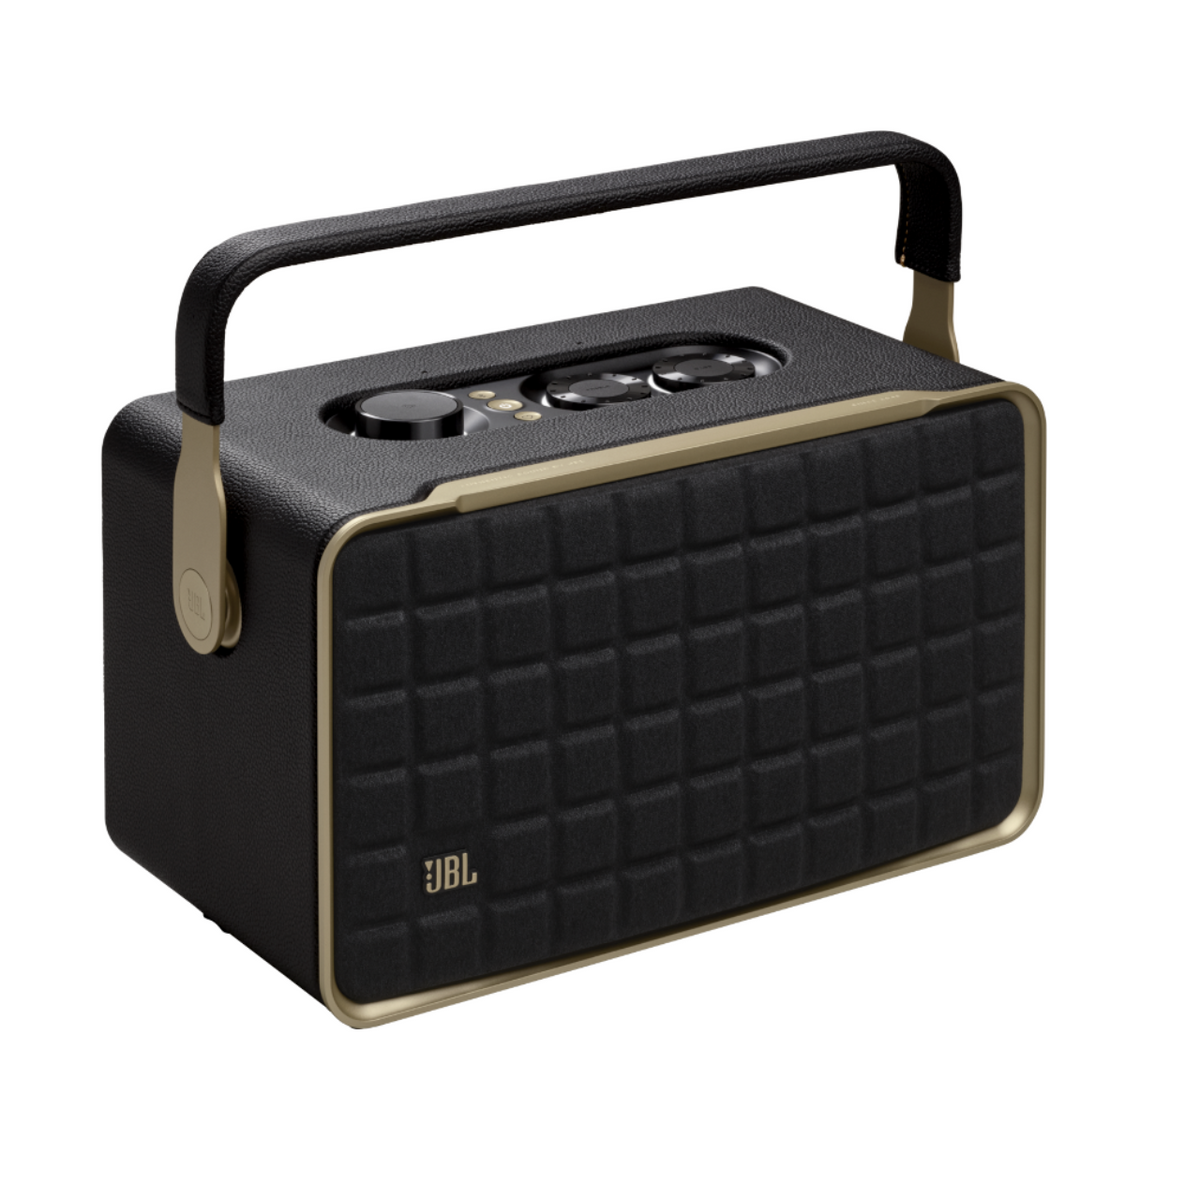 JBL AUTHENTICS 300 Portable smart home speaker with Wi-Fi, Bluetooth and voice assistants with retro design.